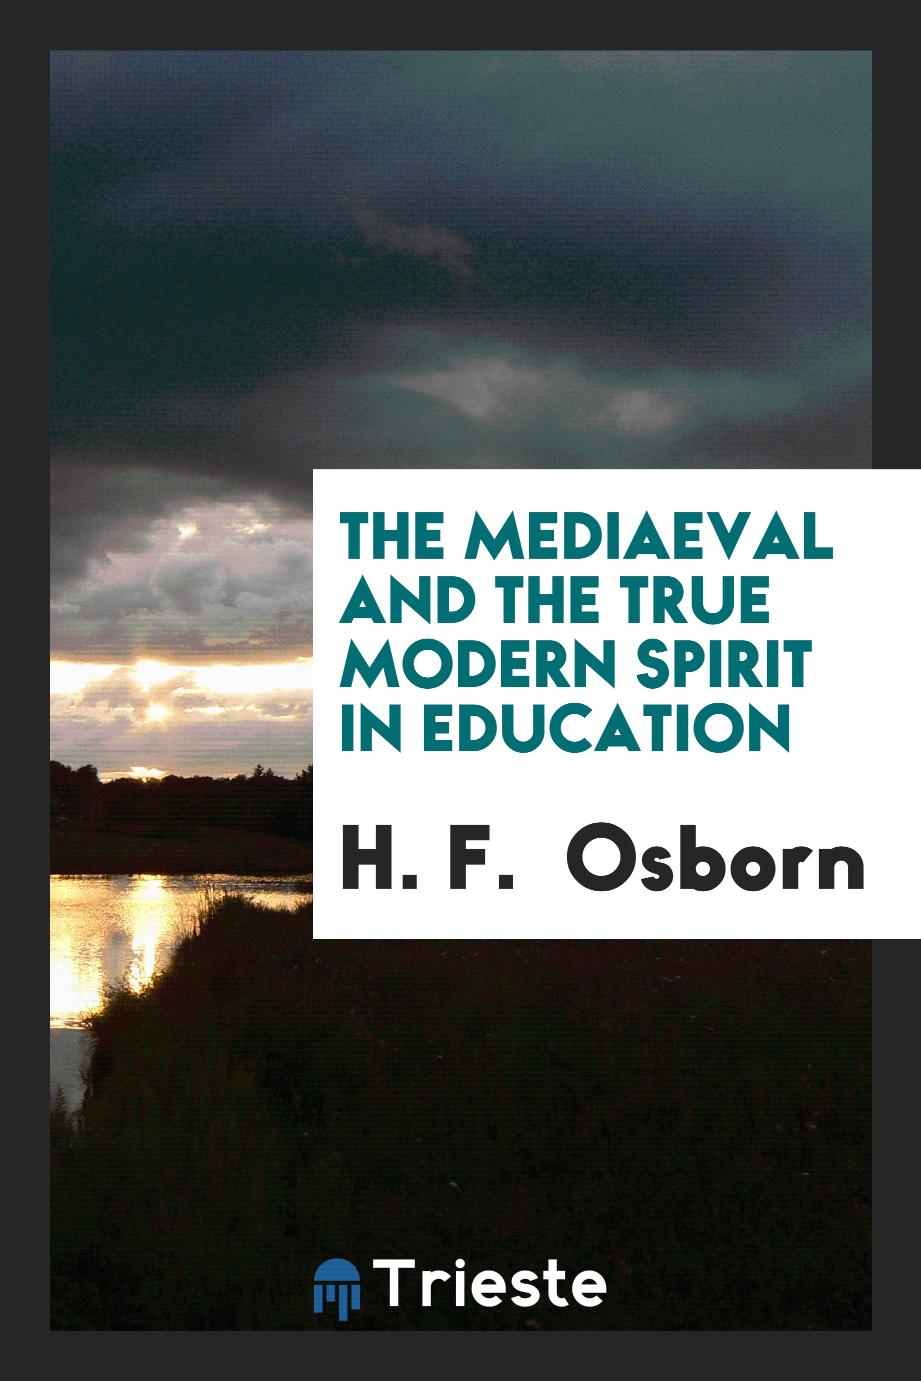 The Mediaeval and the True Modern Spirit in Education